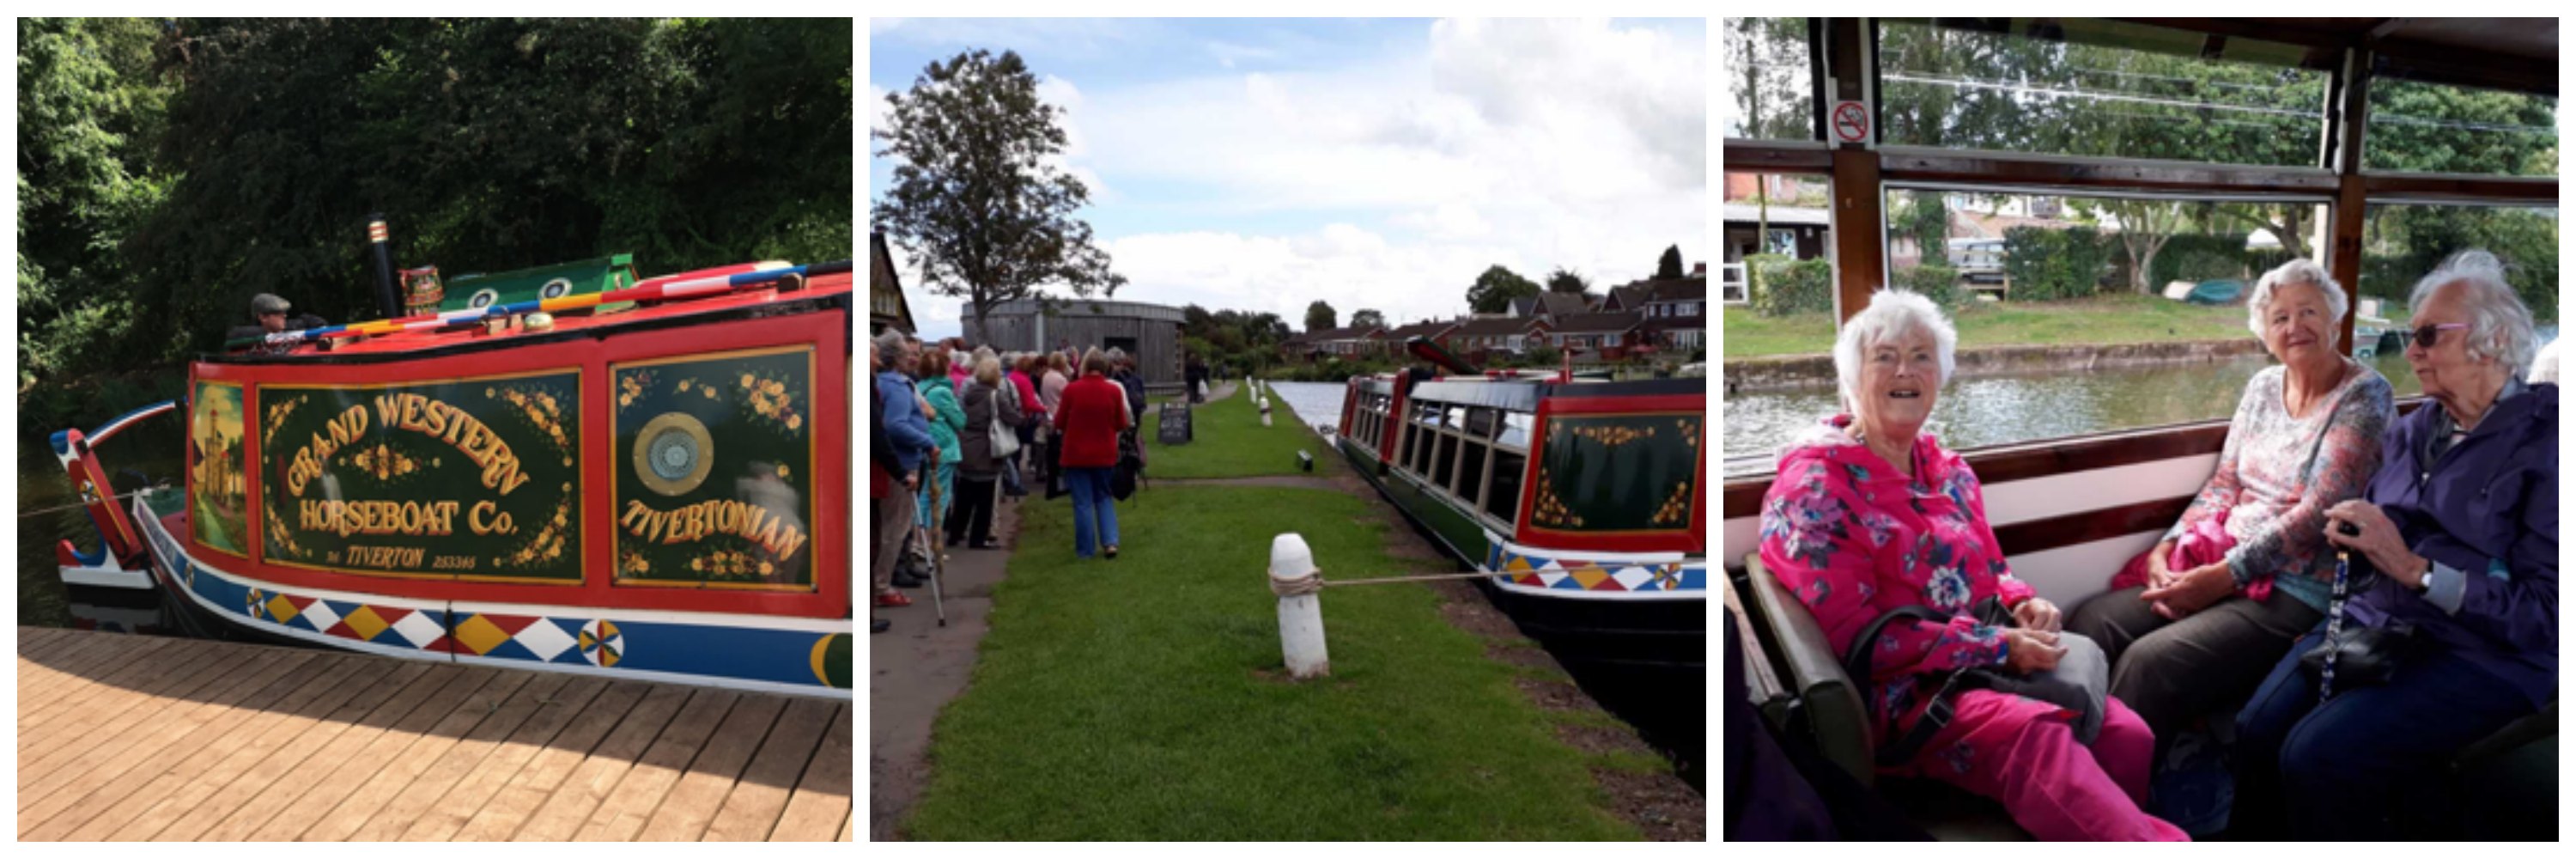 Elburton WI has an outing on board the Tivertonian canal boat